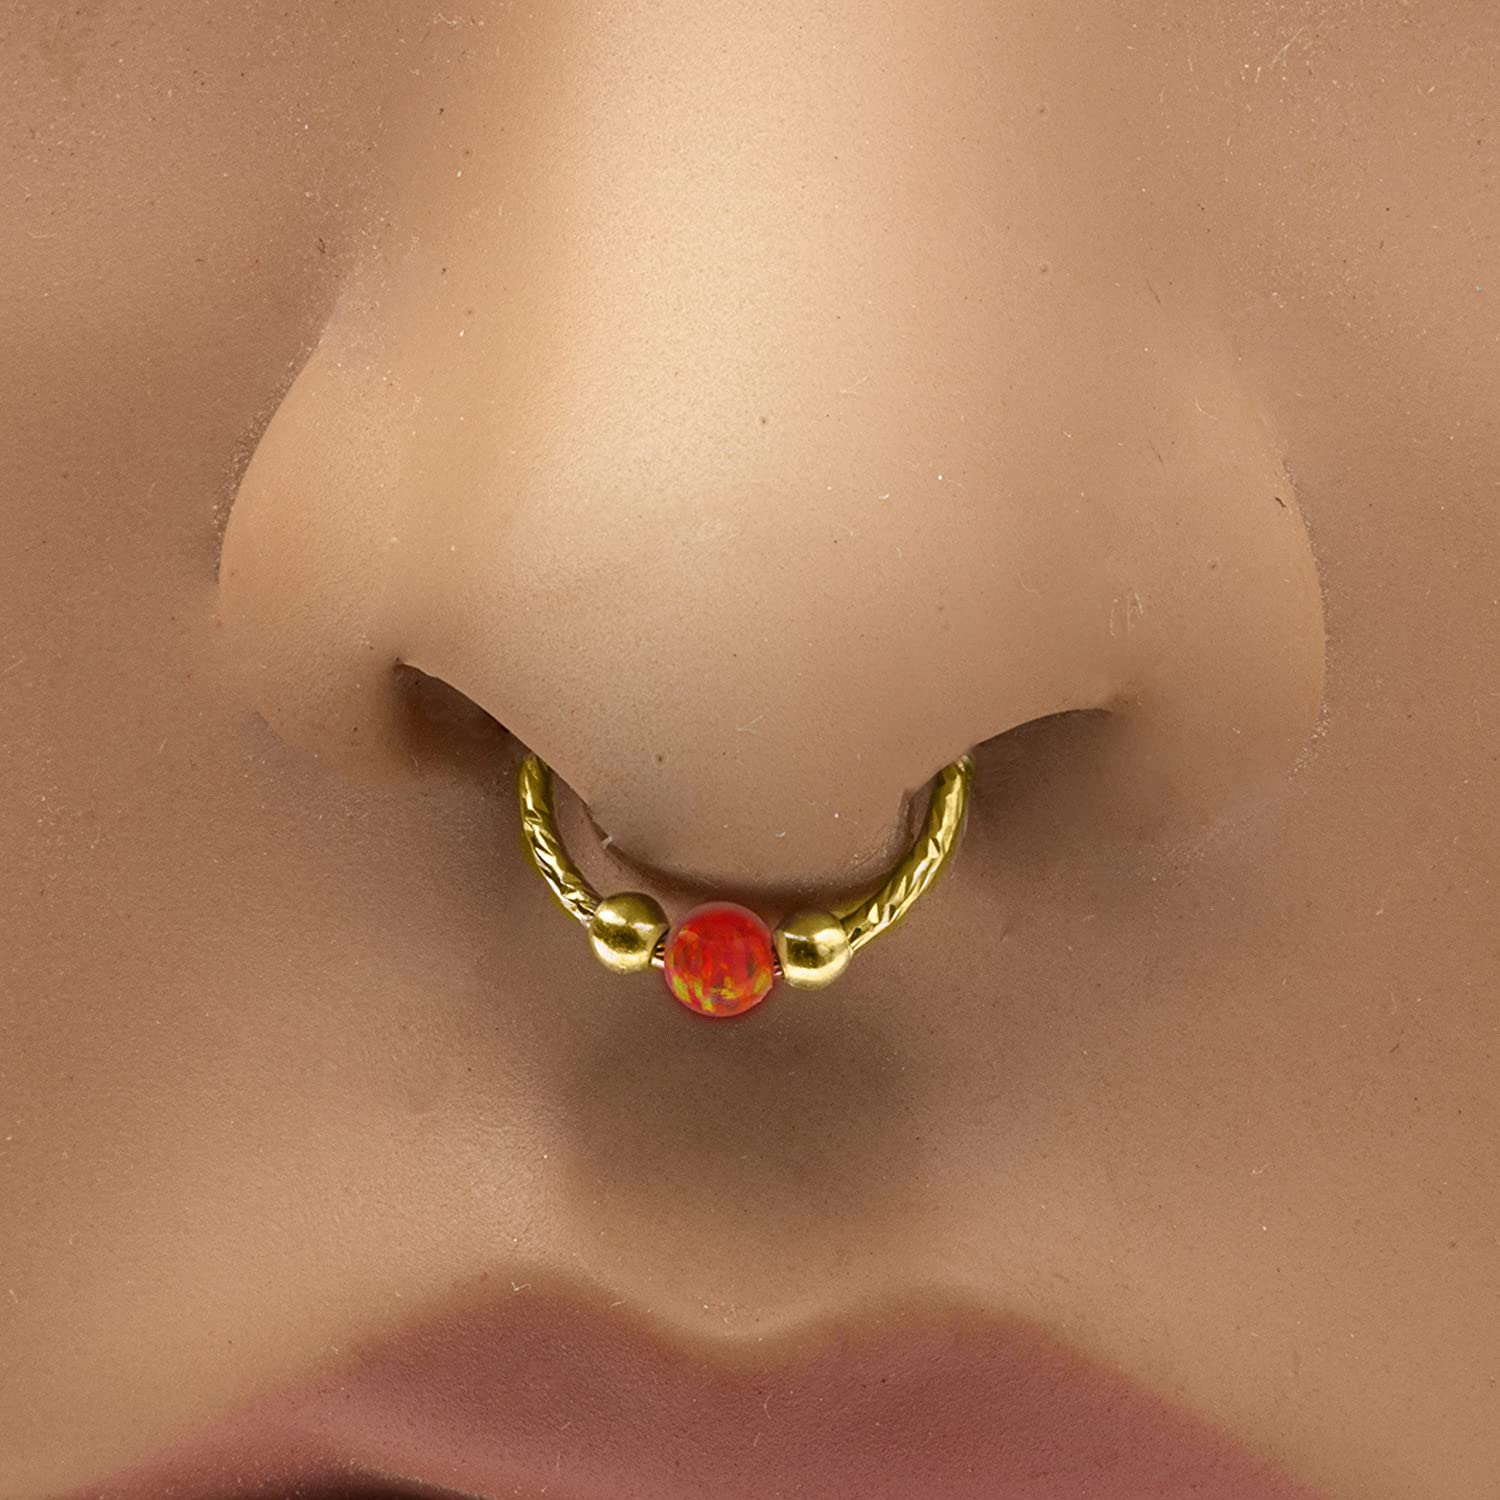 Christmas Sale Faux Septum Ring, Fake Nose Ring, Gold Fake Septum, Gold  Nose Ring, Fake Septum Hoop, No Piercing - Etsy | Faux septum ring, Septum  piercing, Faux septum